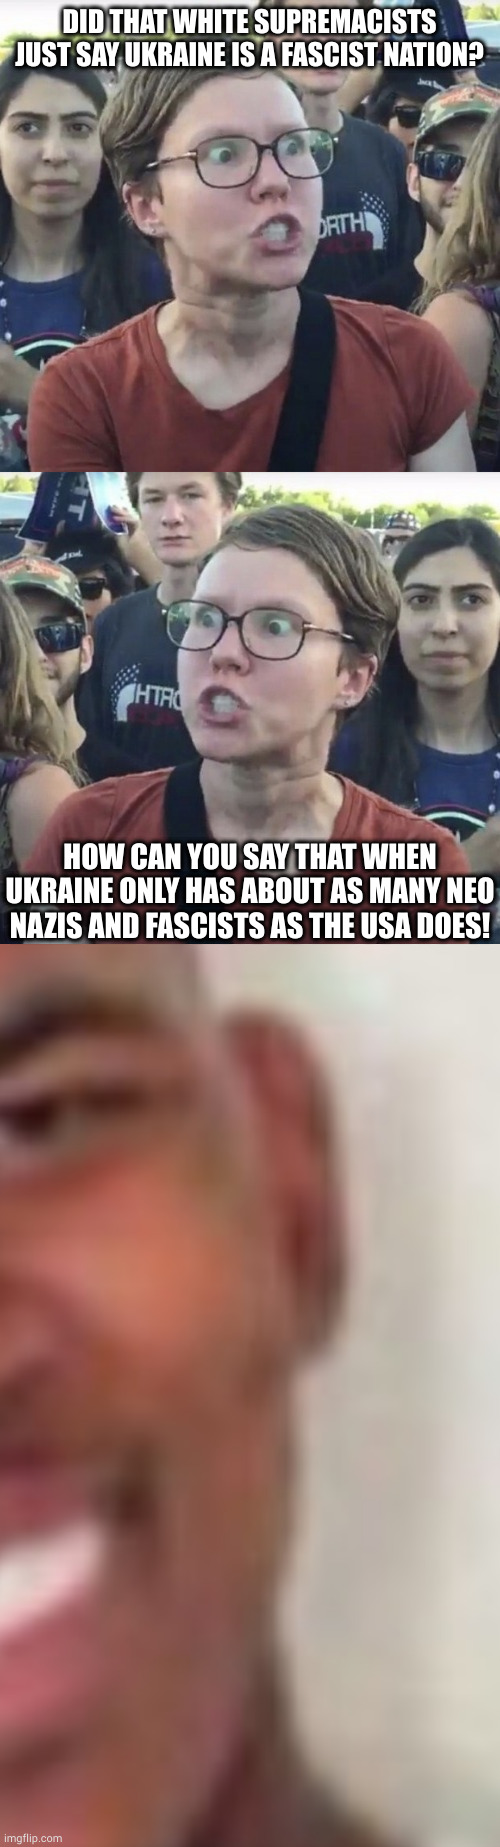 WOW.exe | DID THAT WHITE SUPREMACISTS JUST SAY UKRAINE IS A FASCIST NATION? HOW CAN YOU SAY THAT WHEN UKRAINE ONLY HAS ABOUT AS MANY NEO NAZIS AND FASCISTS AS THE USA DOES! | image tagged in triggered feminist,bruh | made w/ Imgflip meme maker